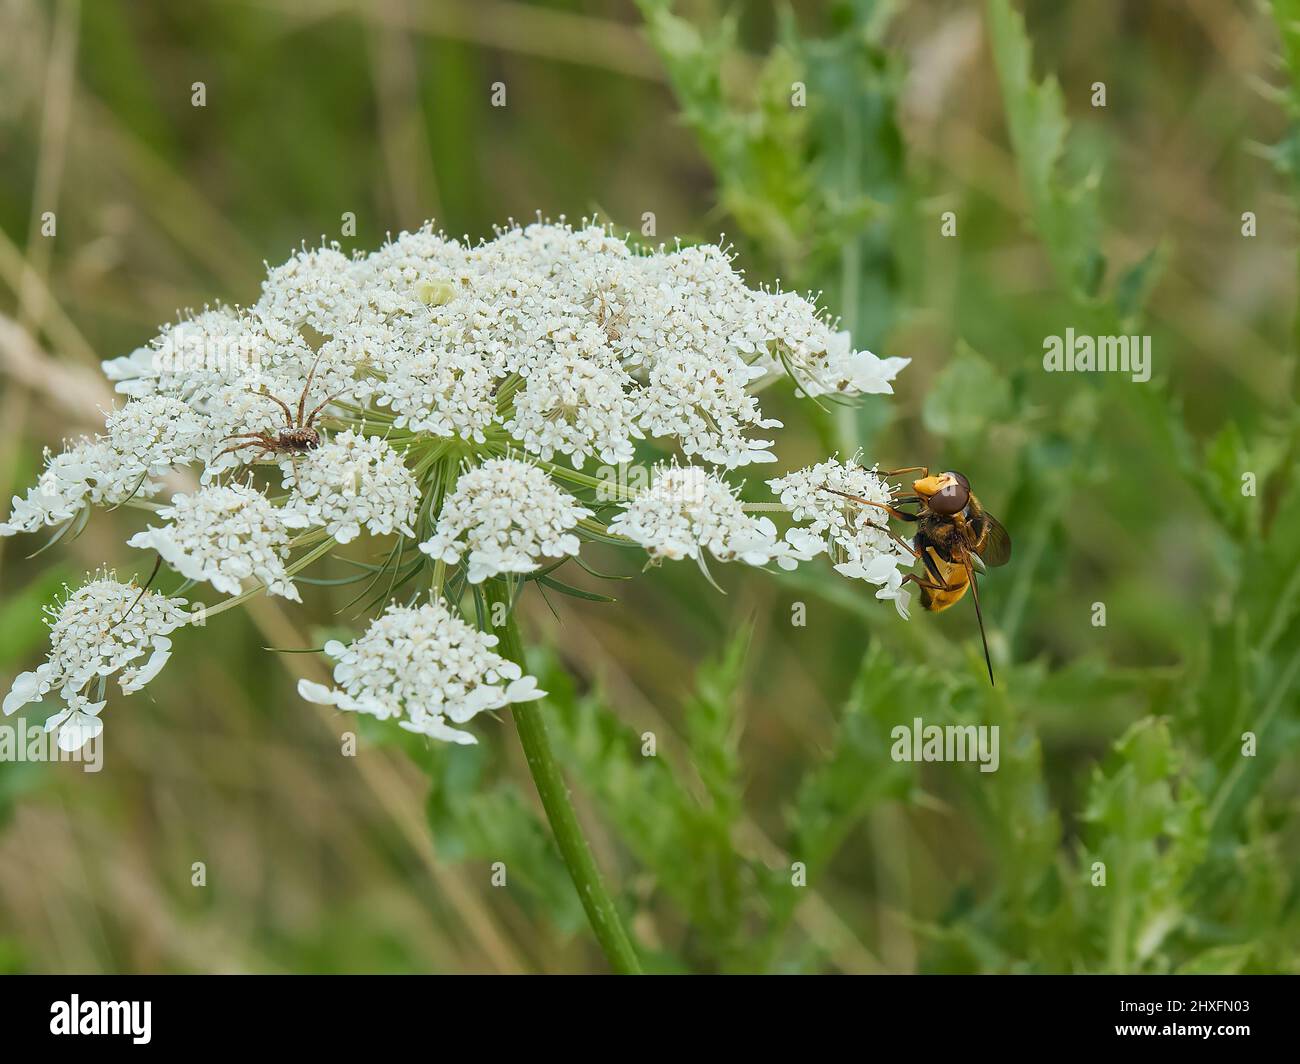 A frozen moment - the moment before a hover fly and a spider meet atop some cow parsley… Stock Photo